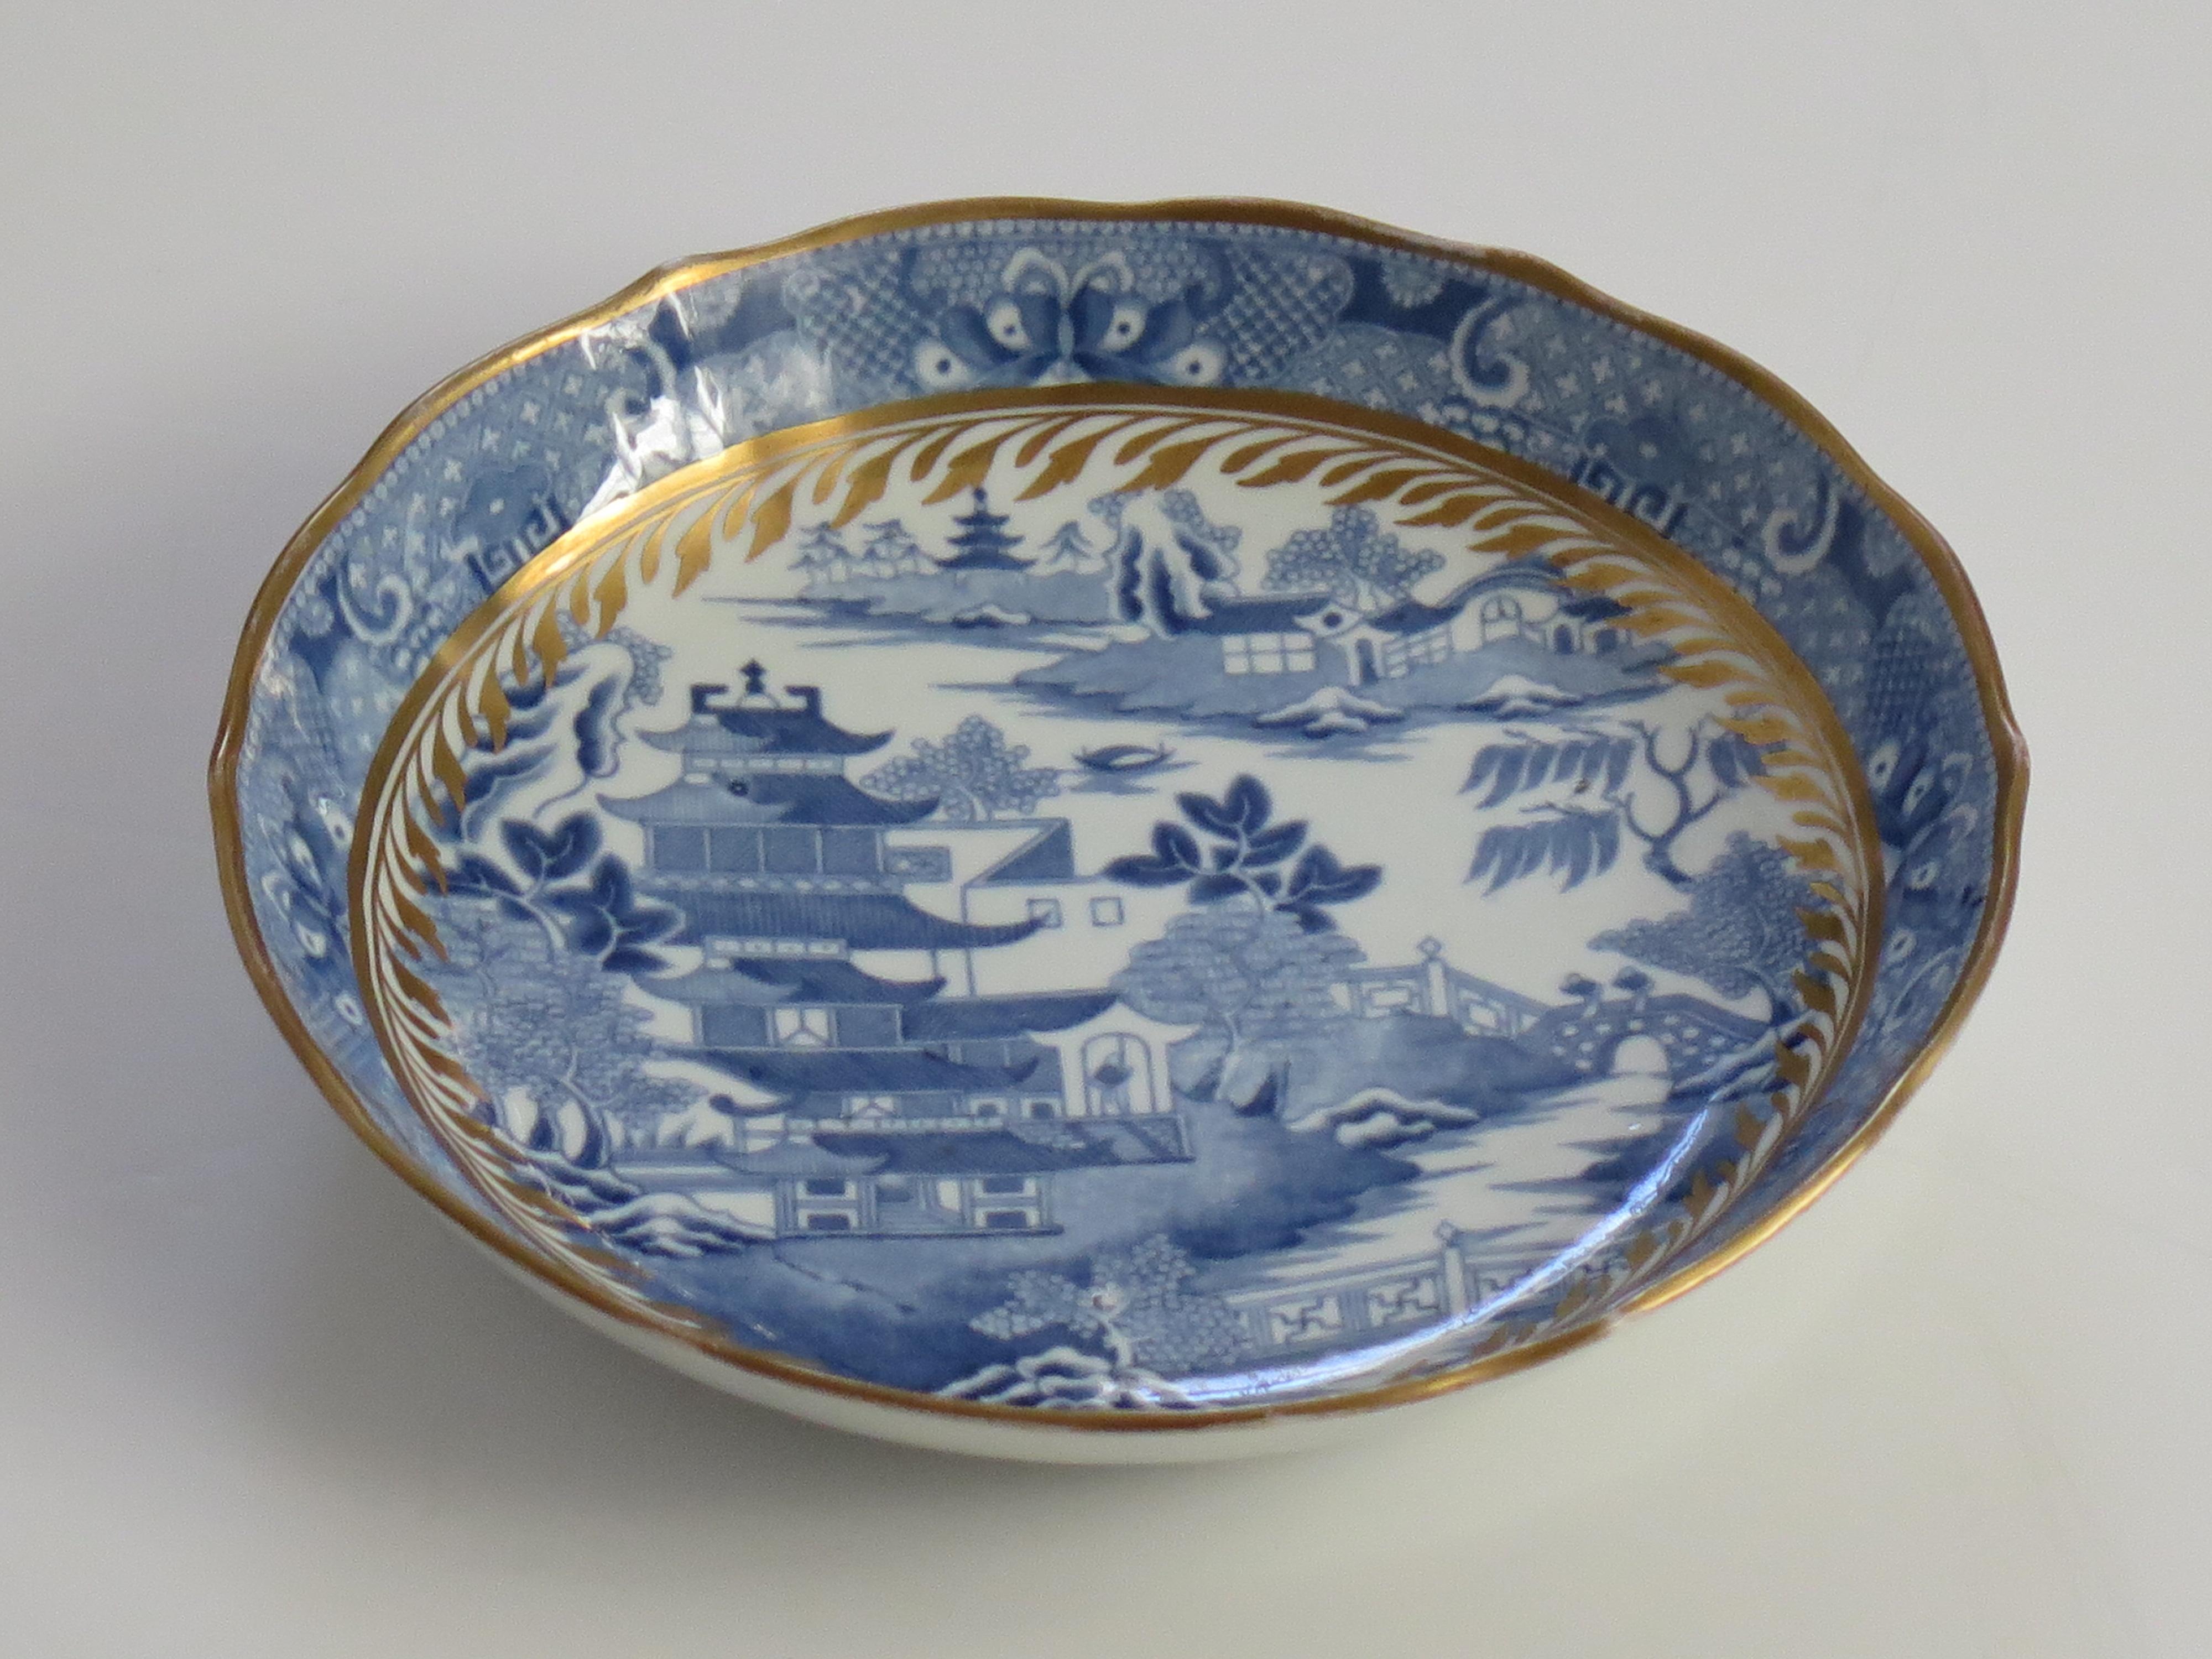 Miles Mason Porcelain Saucer Dish Blue and White Gilded Broseley Pattern Ca 1805 For Sale 3